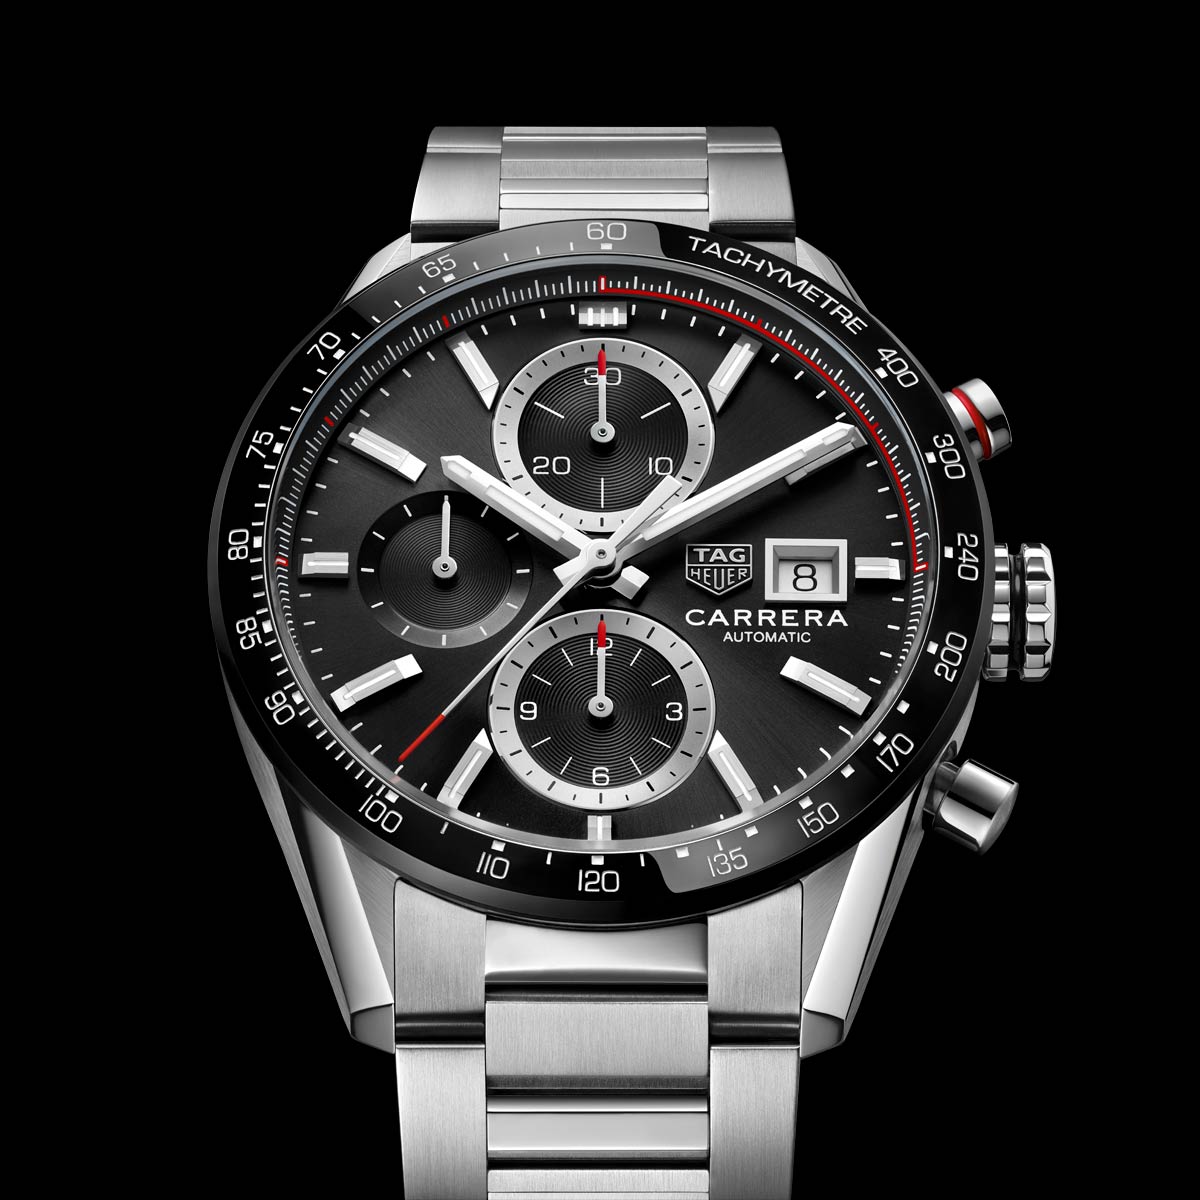 TAG Heuer - New Carrera Calibre 16 Chronographs | Time and Watches | The  watch blog